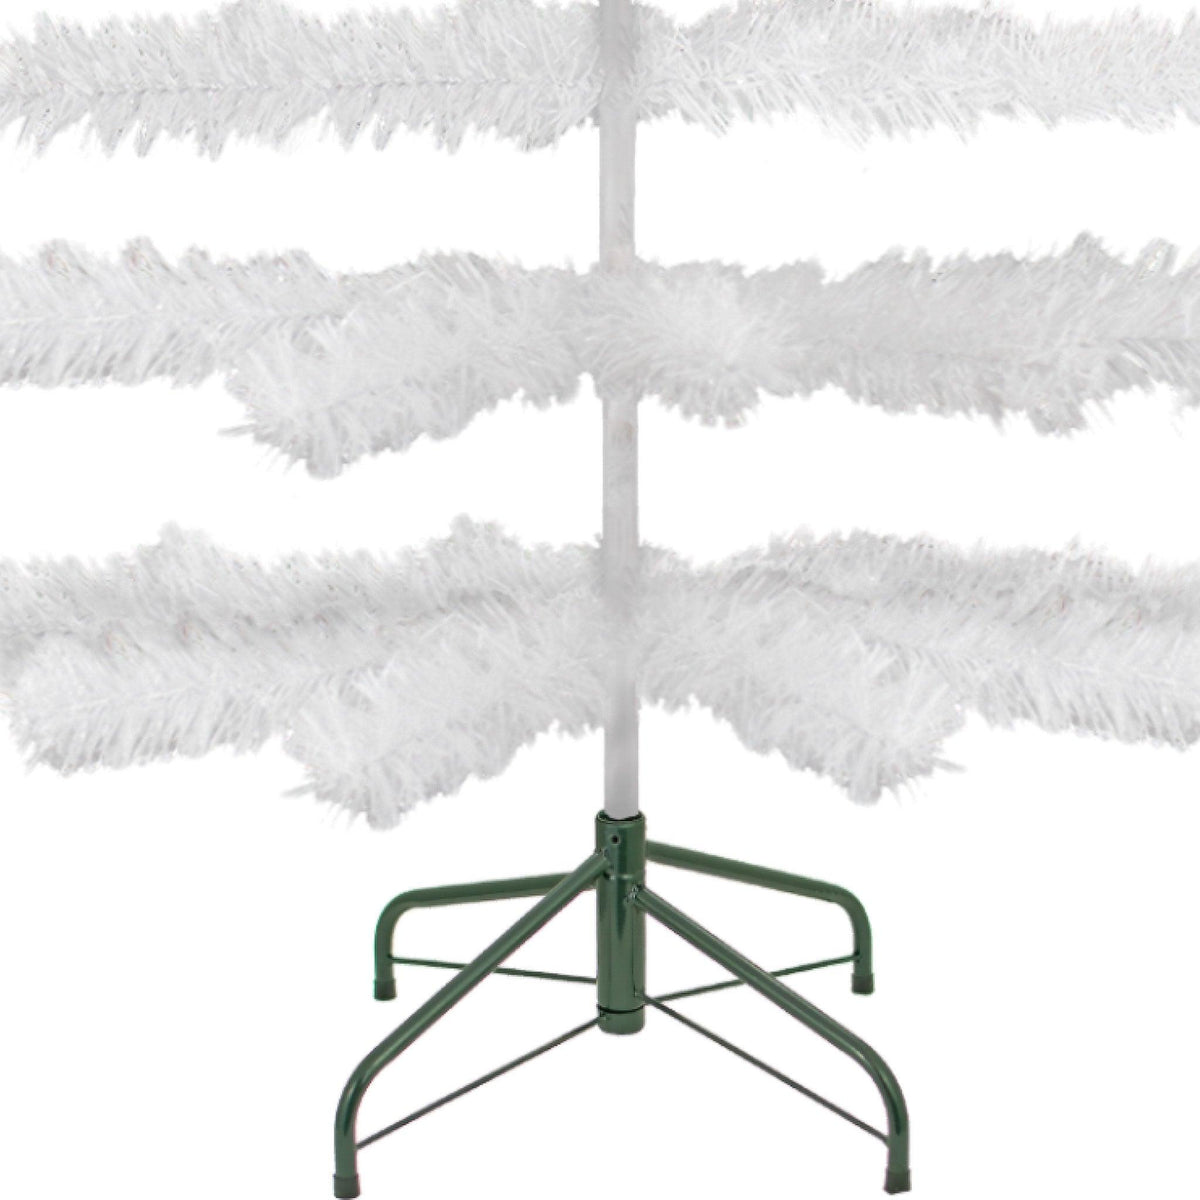 60in tinsel trees come with a green metal stand.  Lee Display's 5ft White Tinsel Christmas Tree on sale now at leedisplay.com